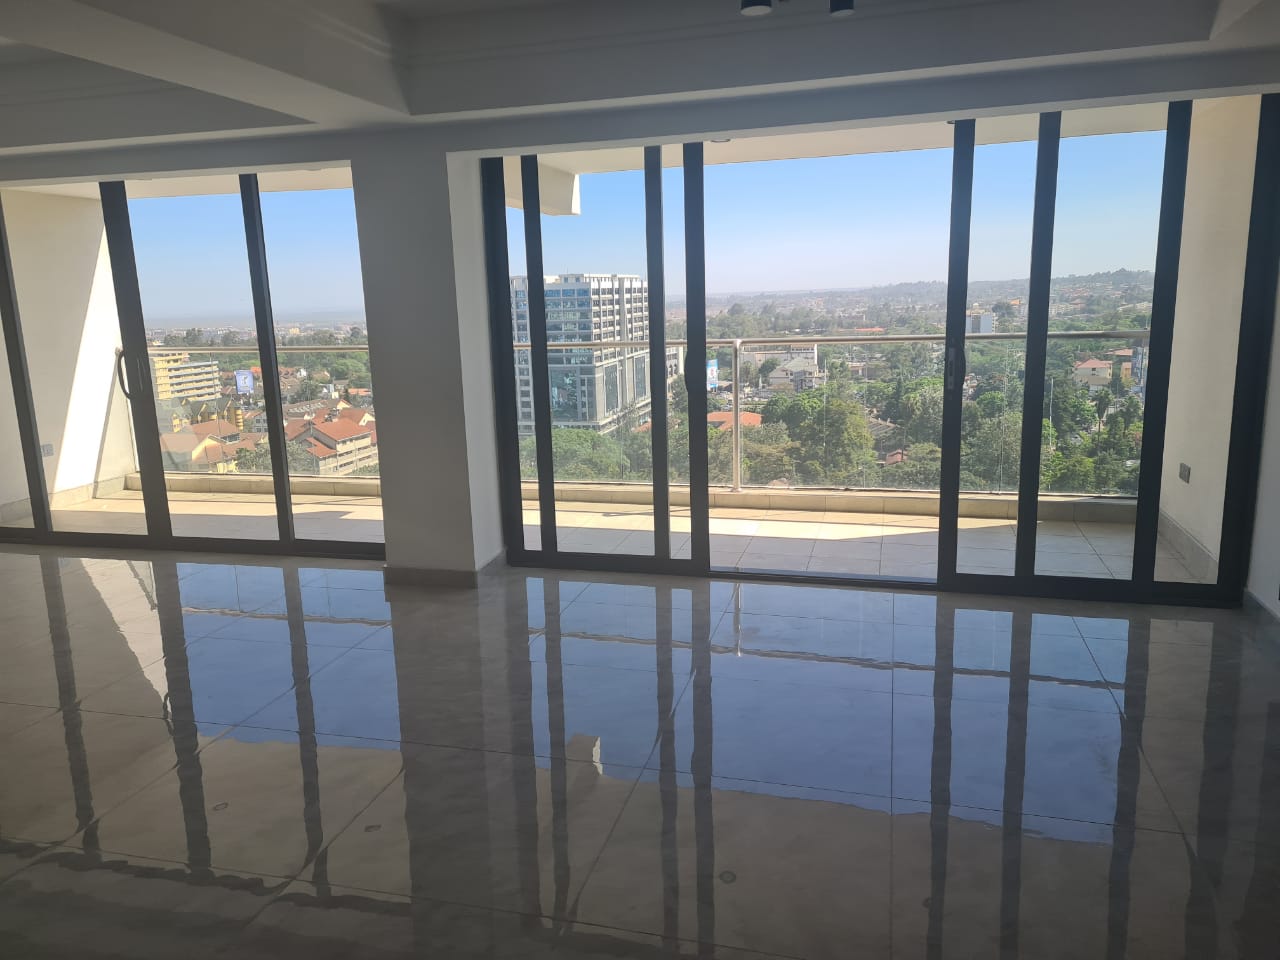 Luxury Penthouse for Sale in Kilimani with 5 Bedroom All En-suite at KSH36M26